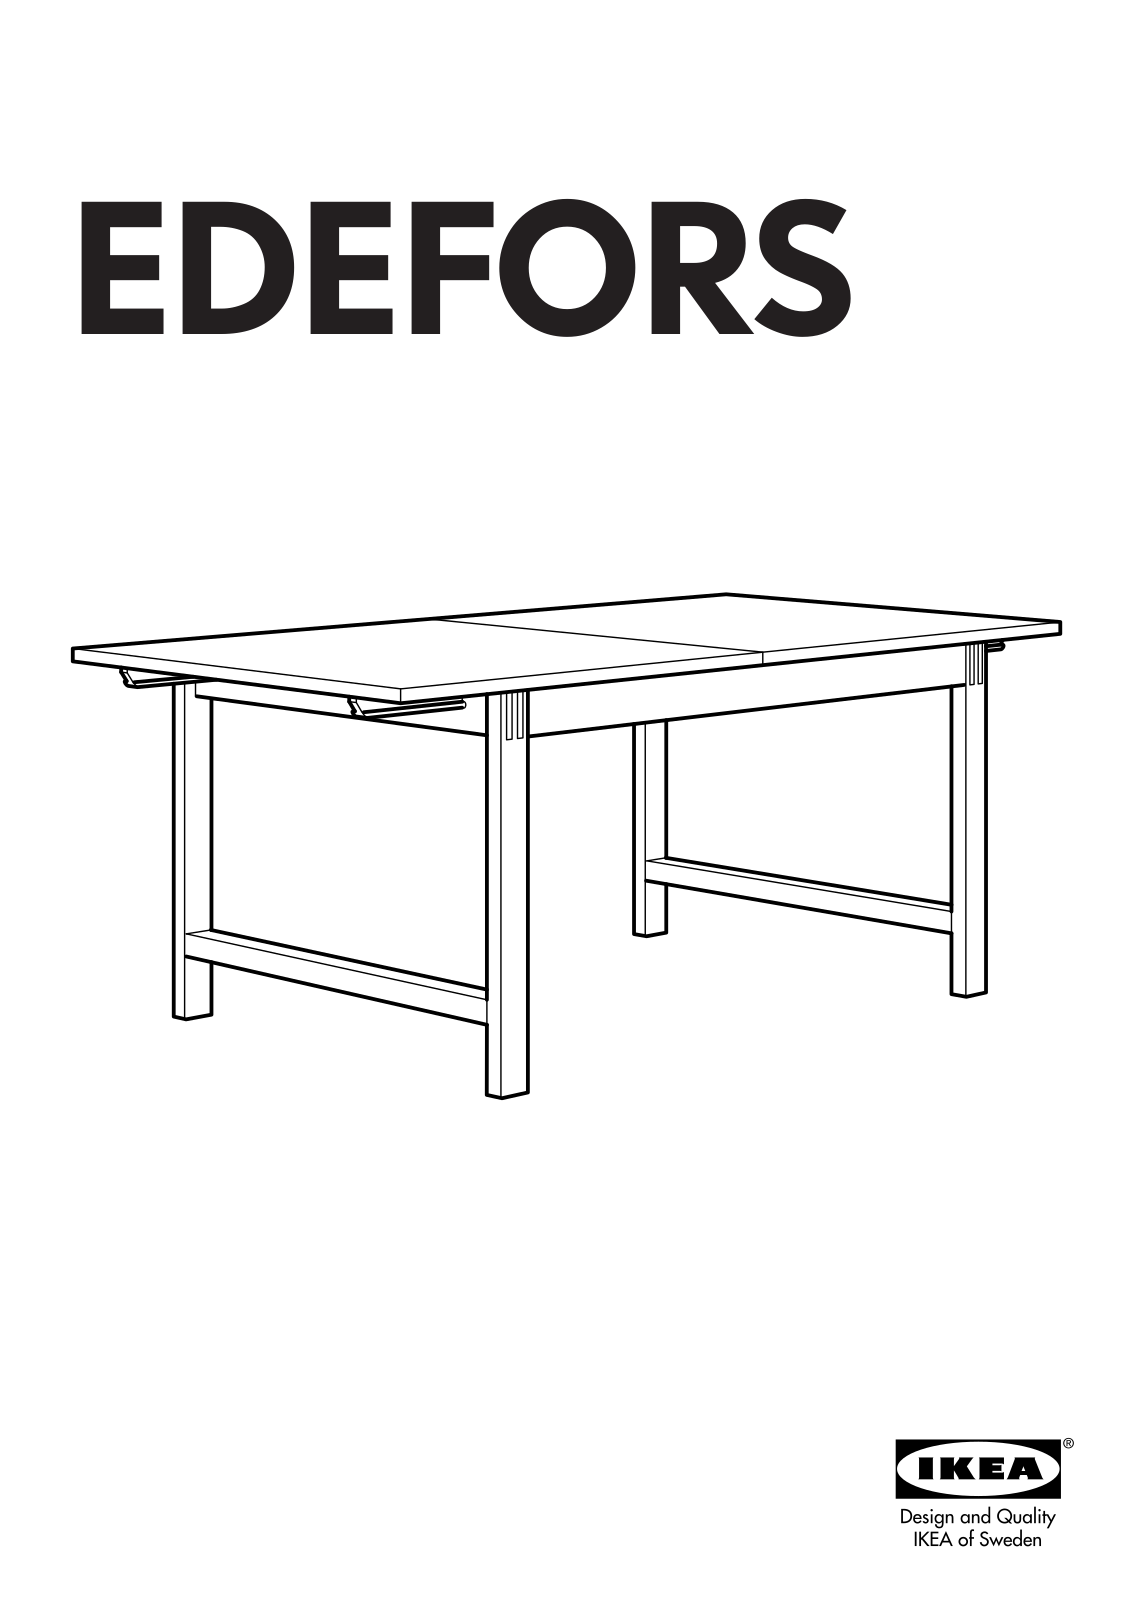 IKEA EDEFORS DINING TABLE 71-90X39 Assembly Instruction